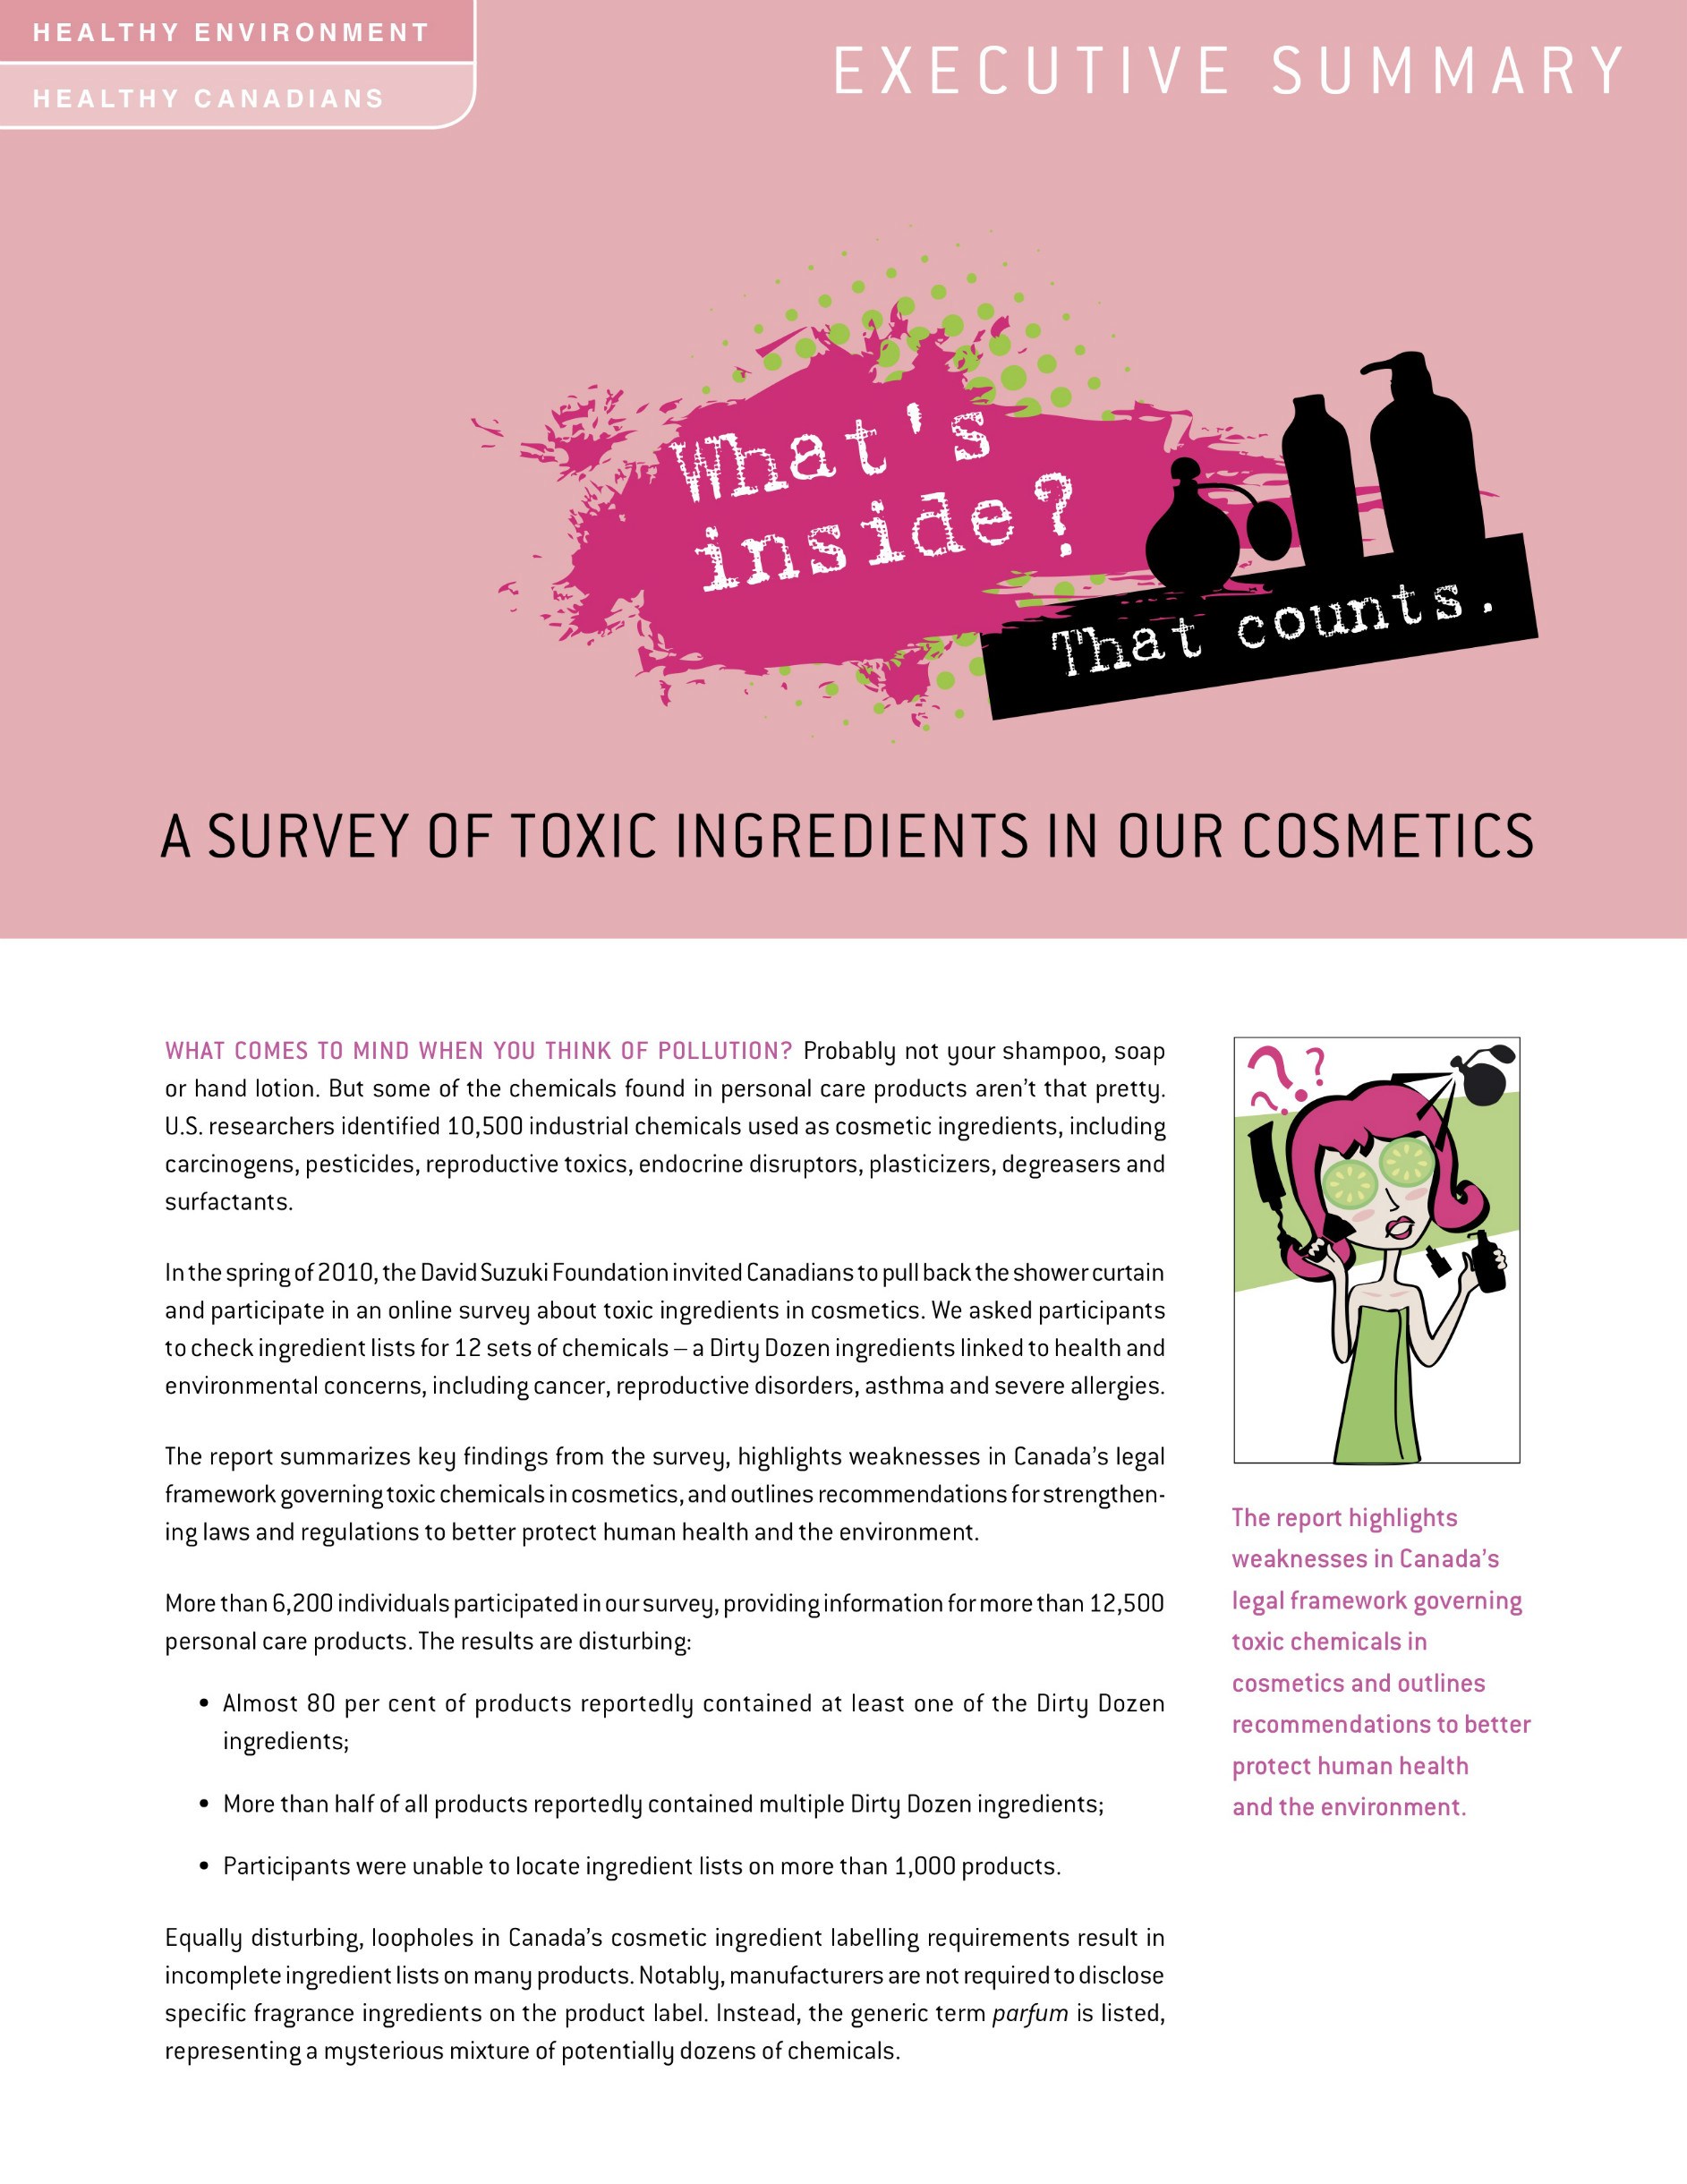 EXECUTIVE SUMMARY — What's Inside? That Counts: A Survey of Toxic Ingredients in Our Cosmetics